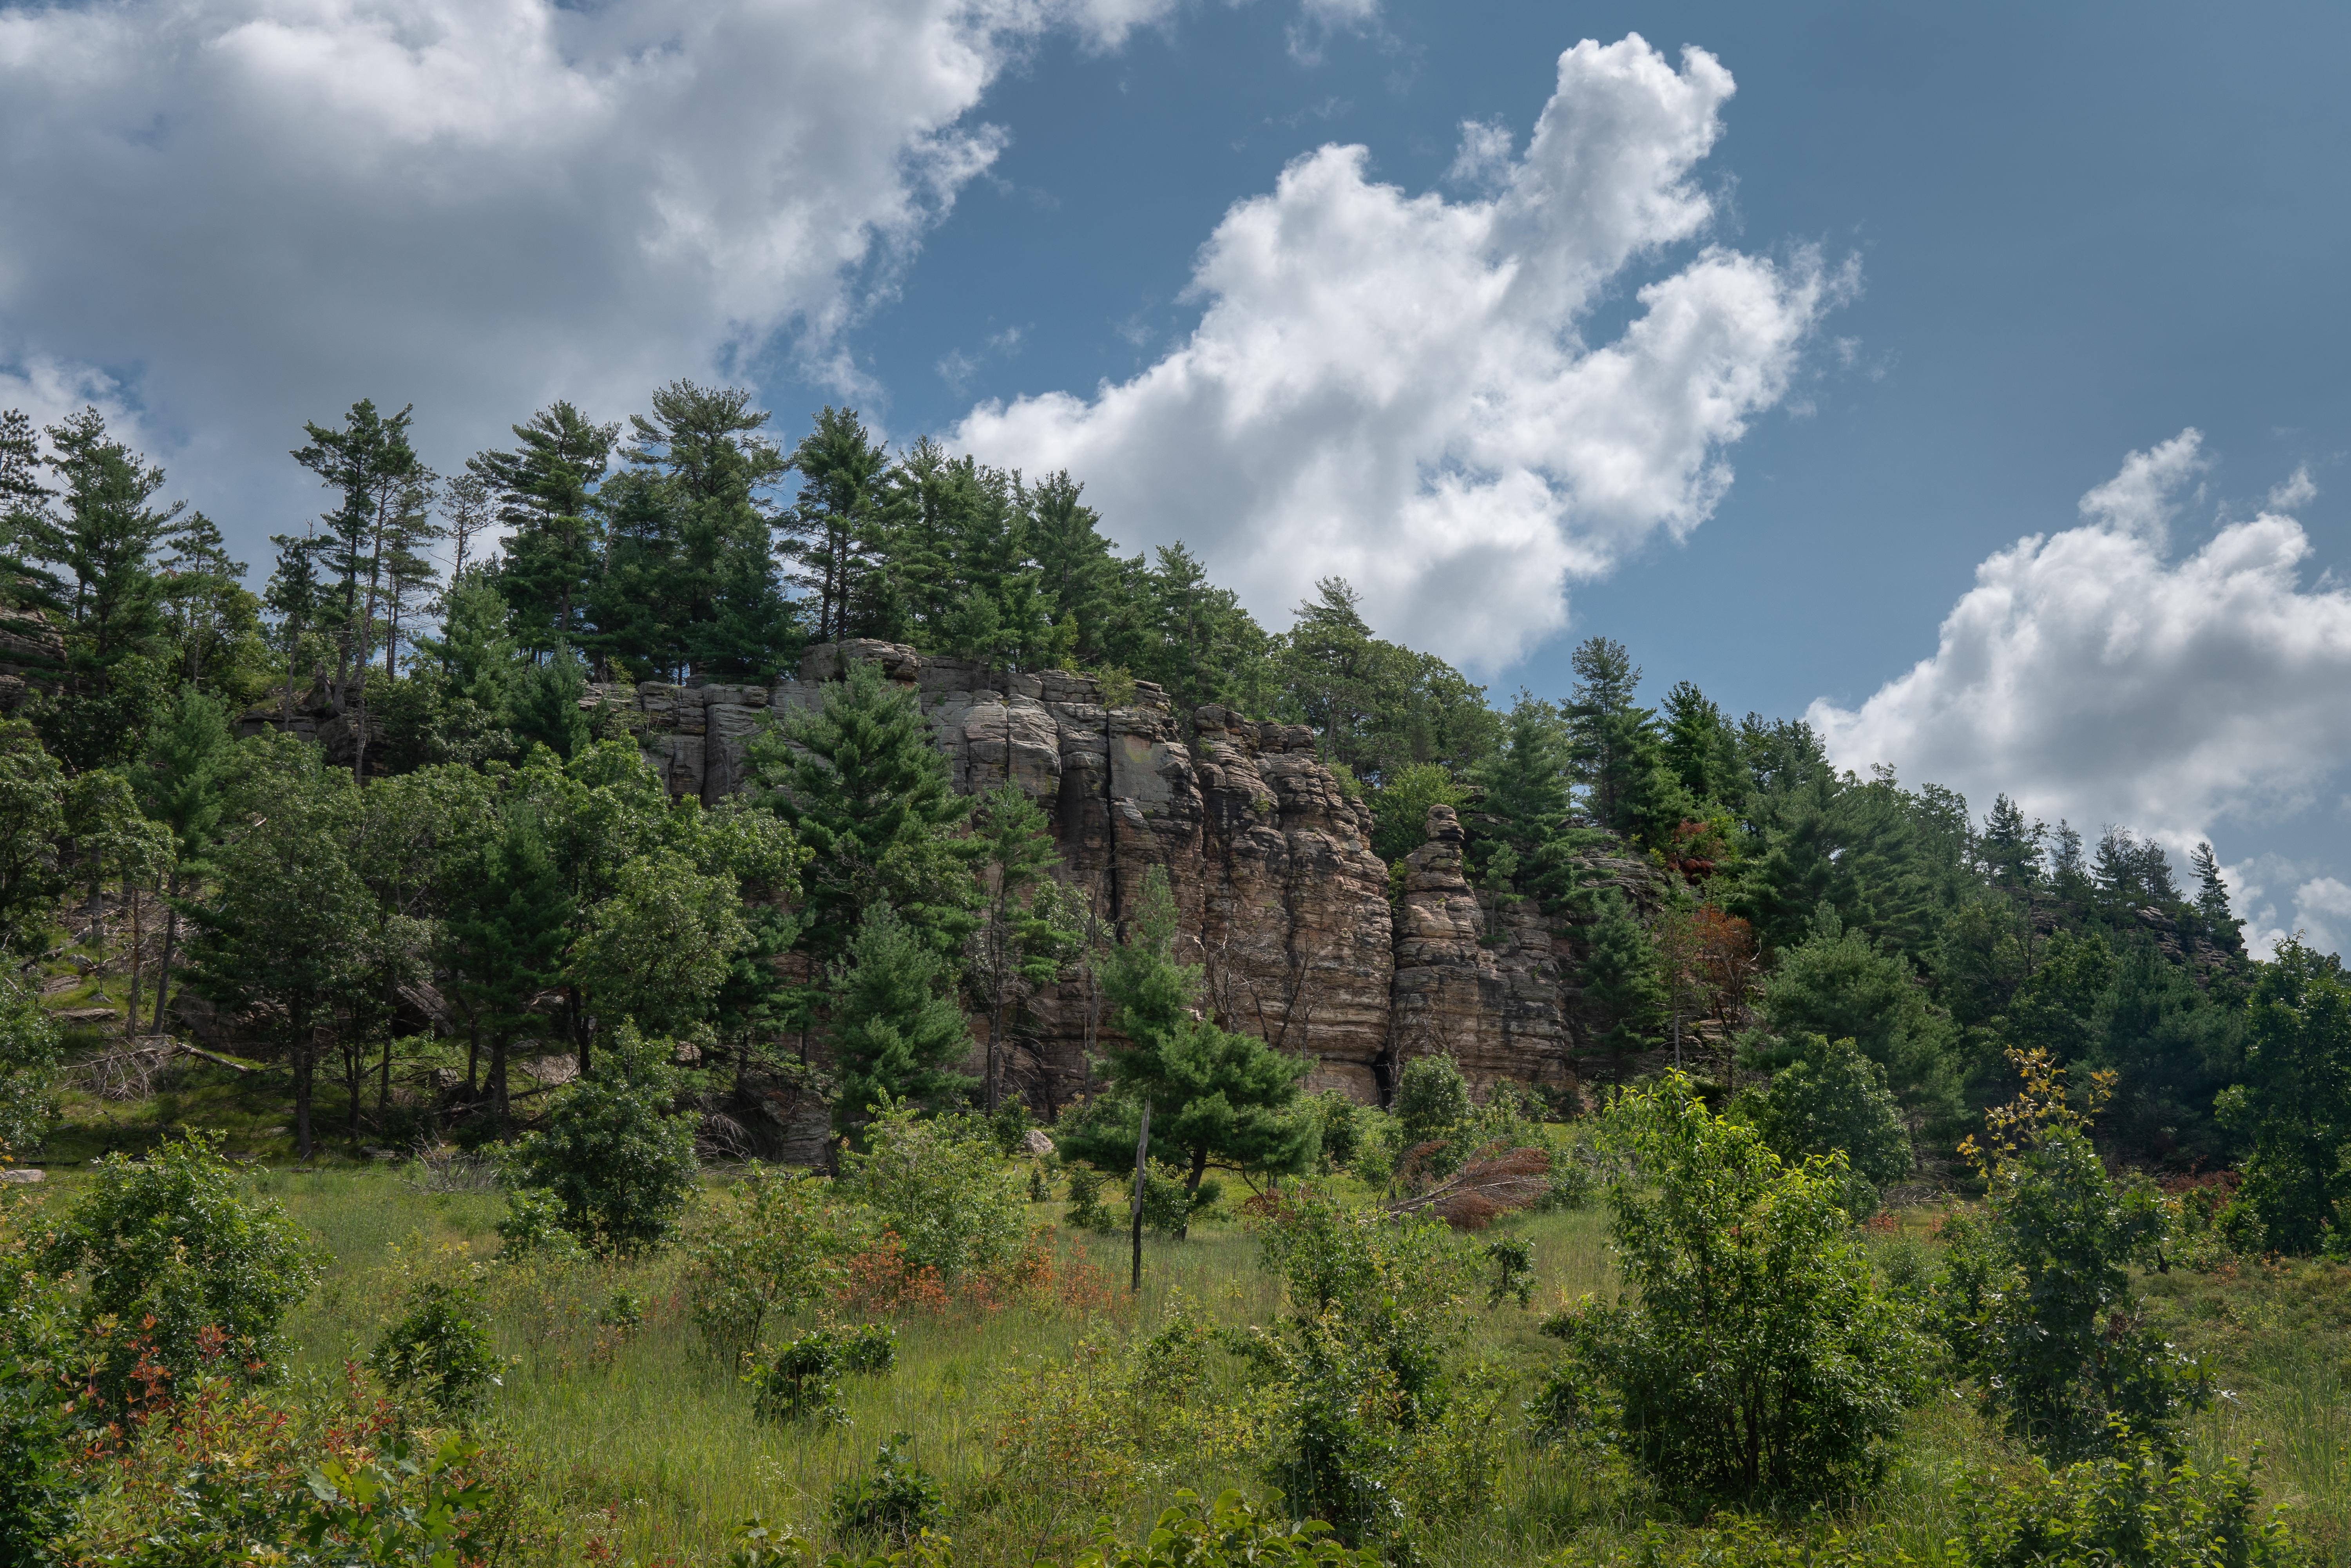 General 6000x4002 cliff landscape nature clouds forest Wisconsin USA